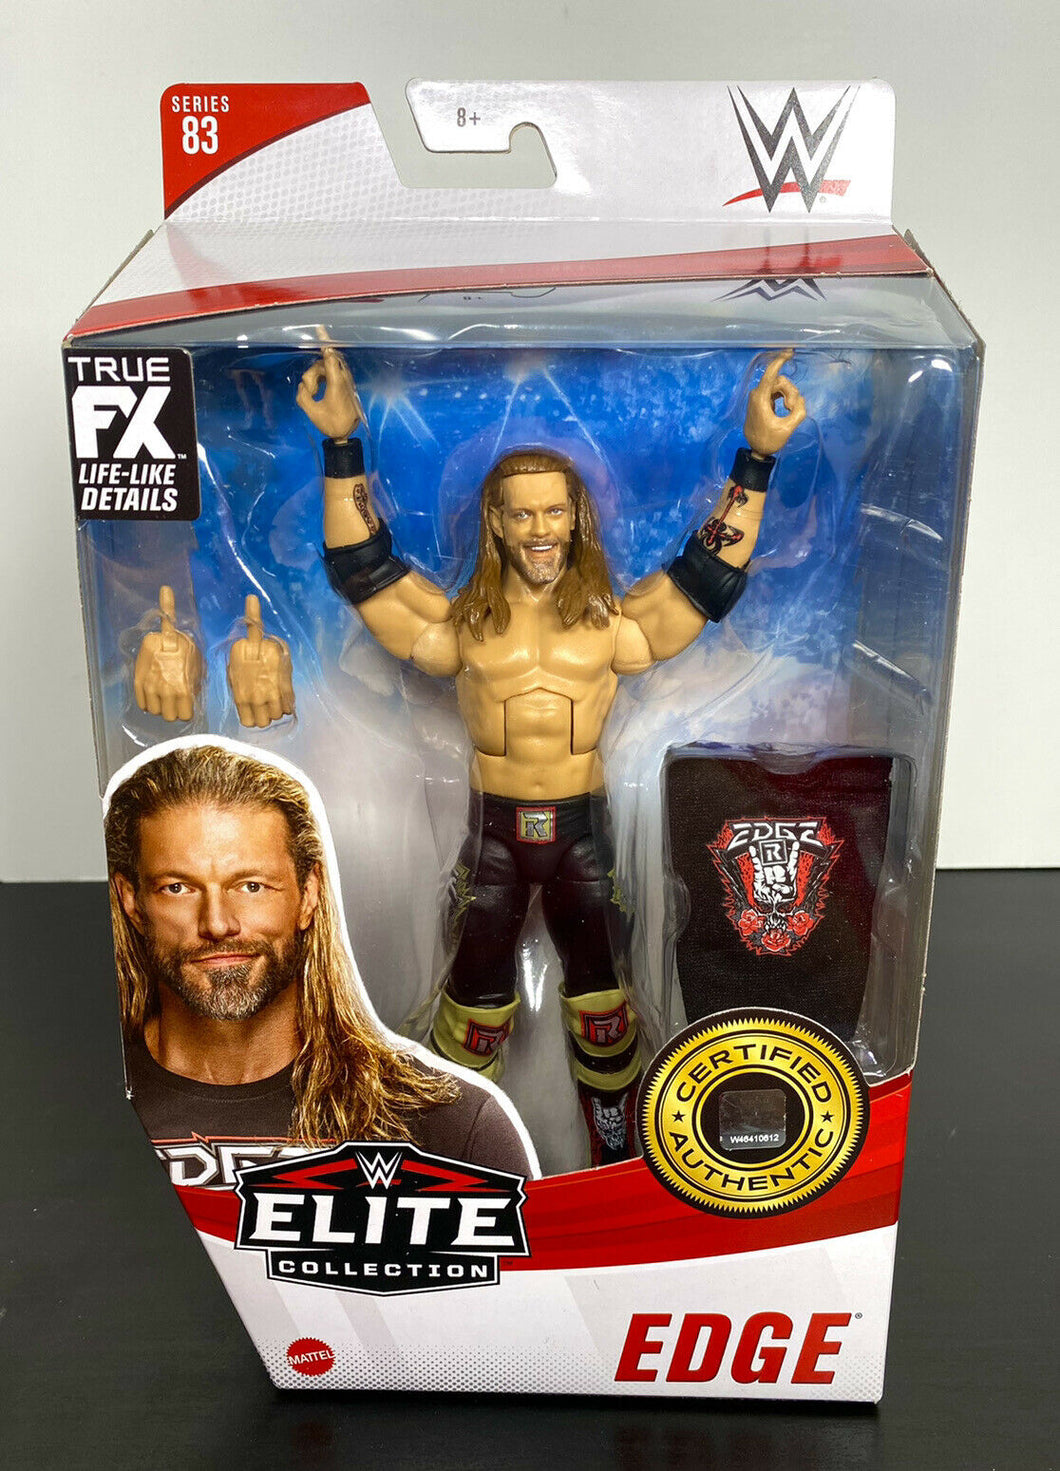 2021 WWE Elite Collection Series 83 Action Figure: EDGE (CHASE, Black Attire)